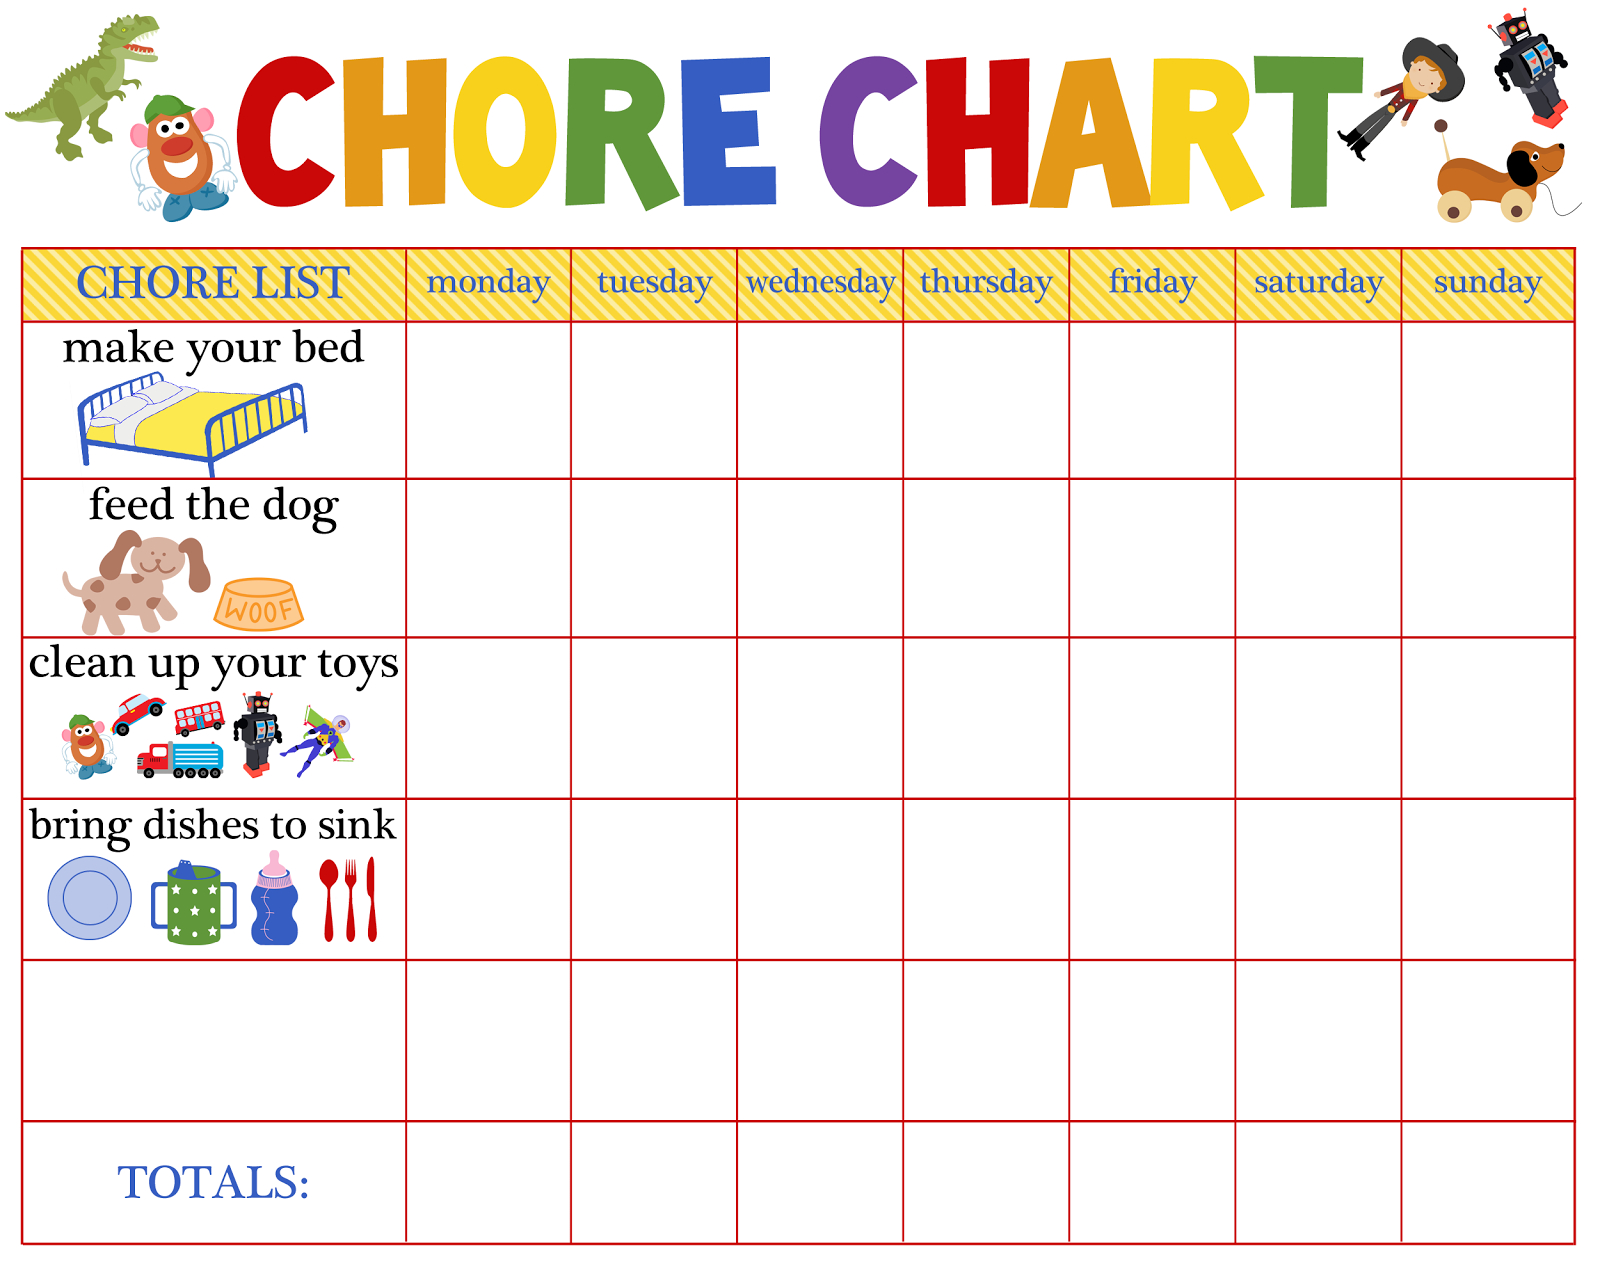 Chore Chart For 2 Year Old